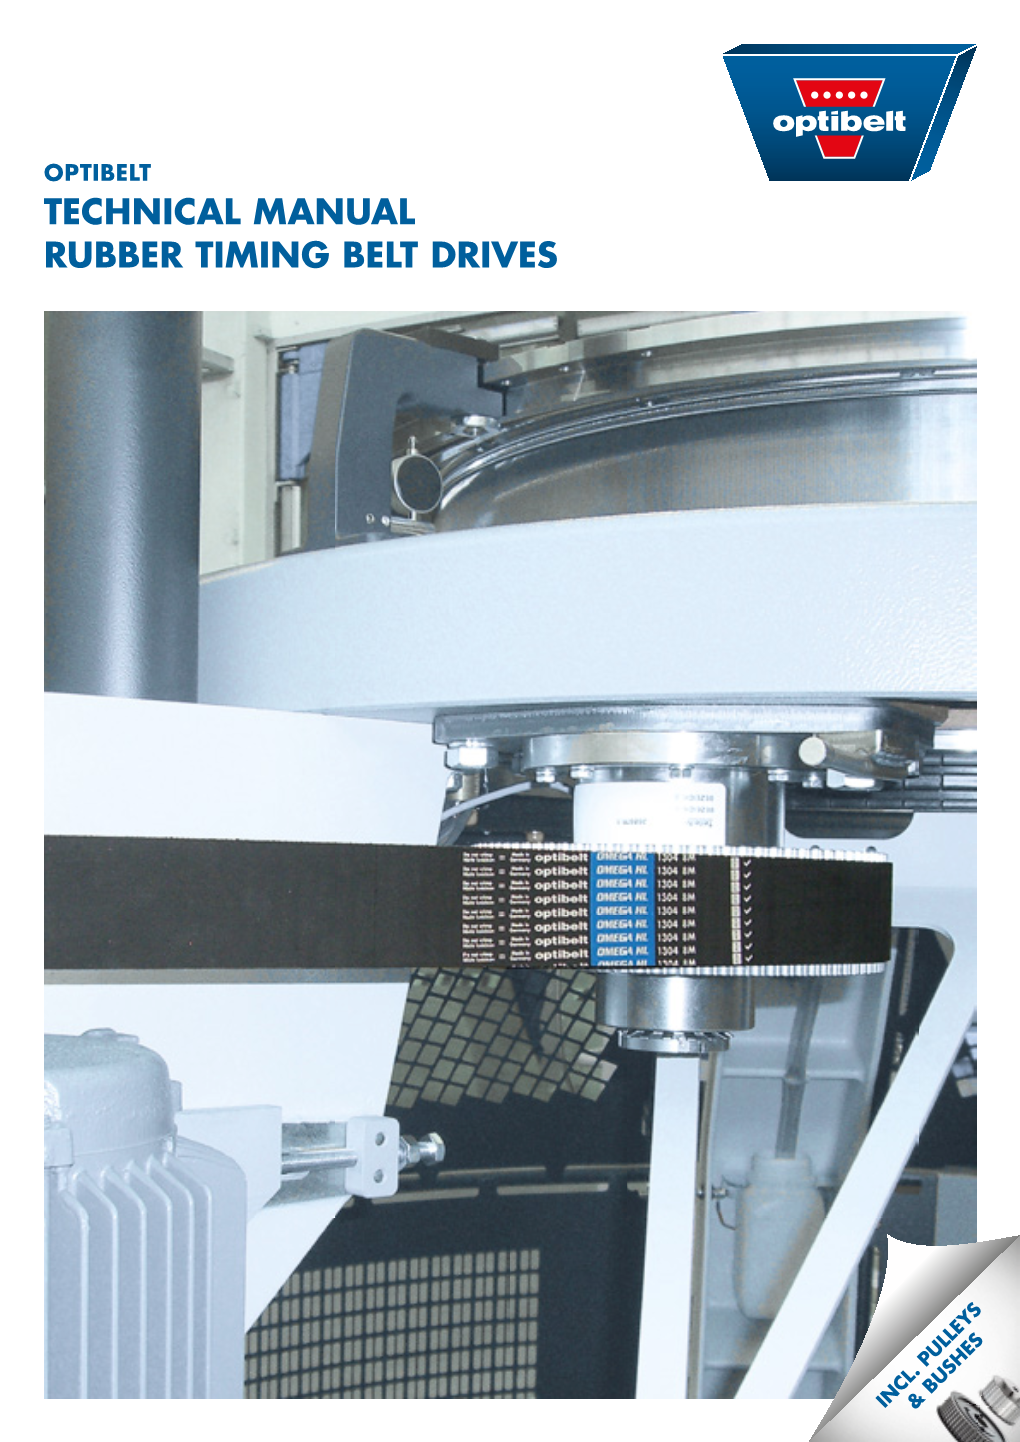 TECHNICAL MANUAL Rubber Timing Belt Drives